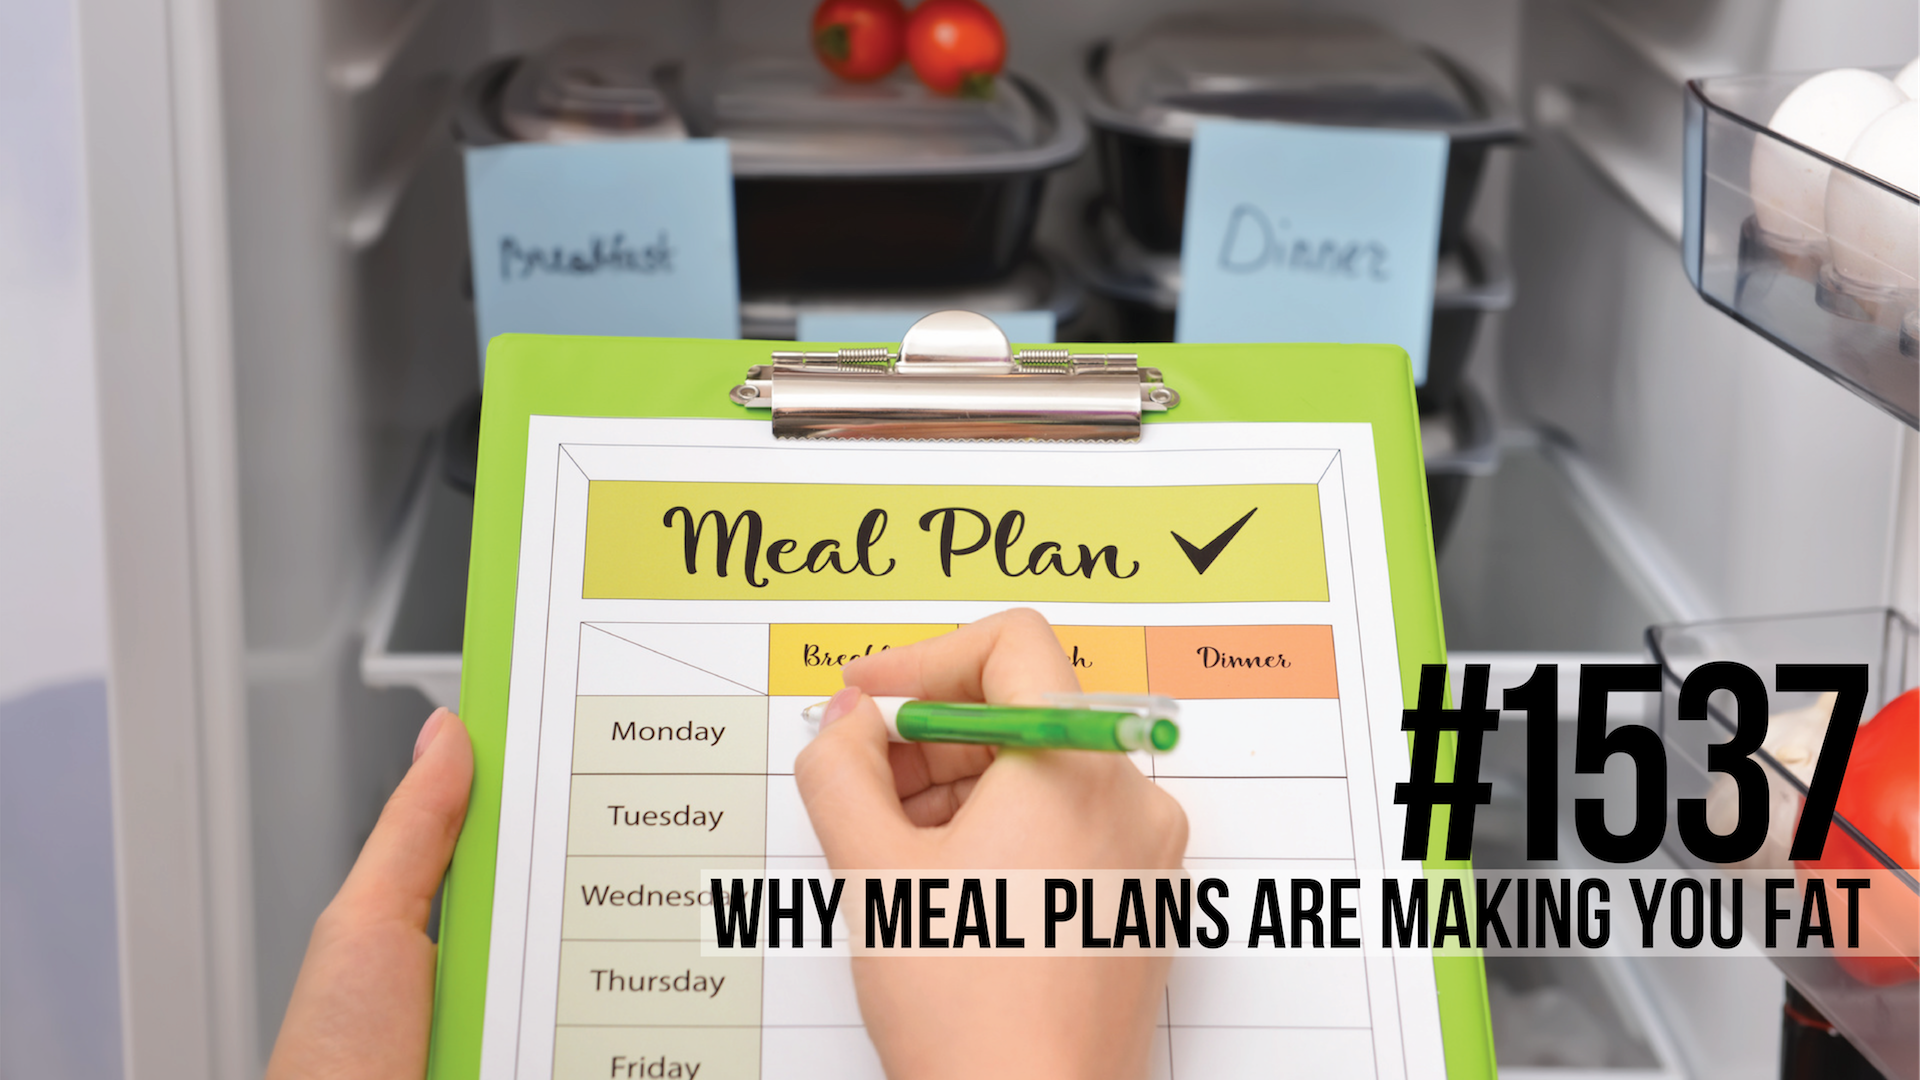 1537: Why Meal Plans Are Making You Fat